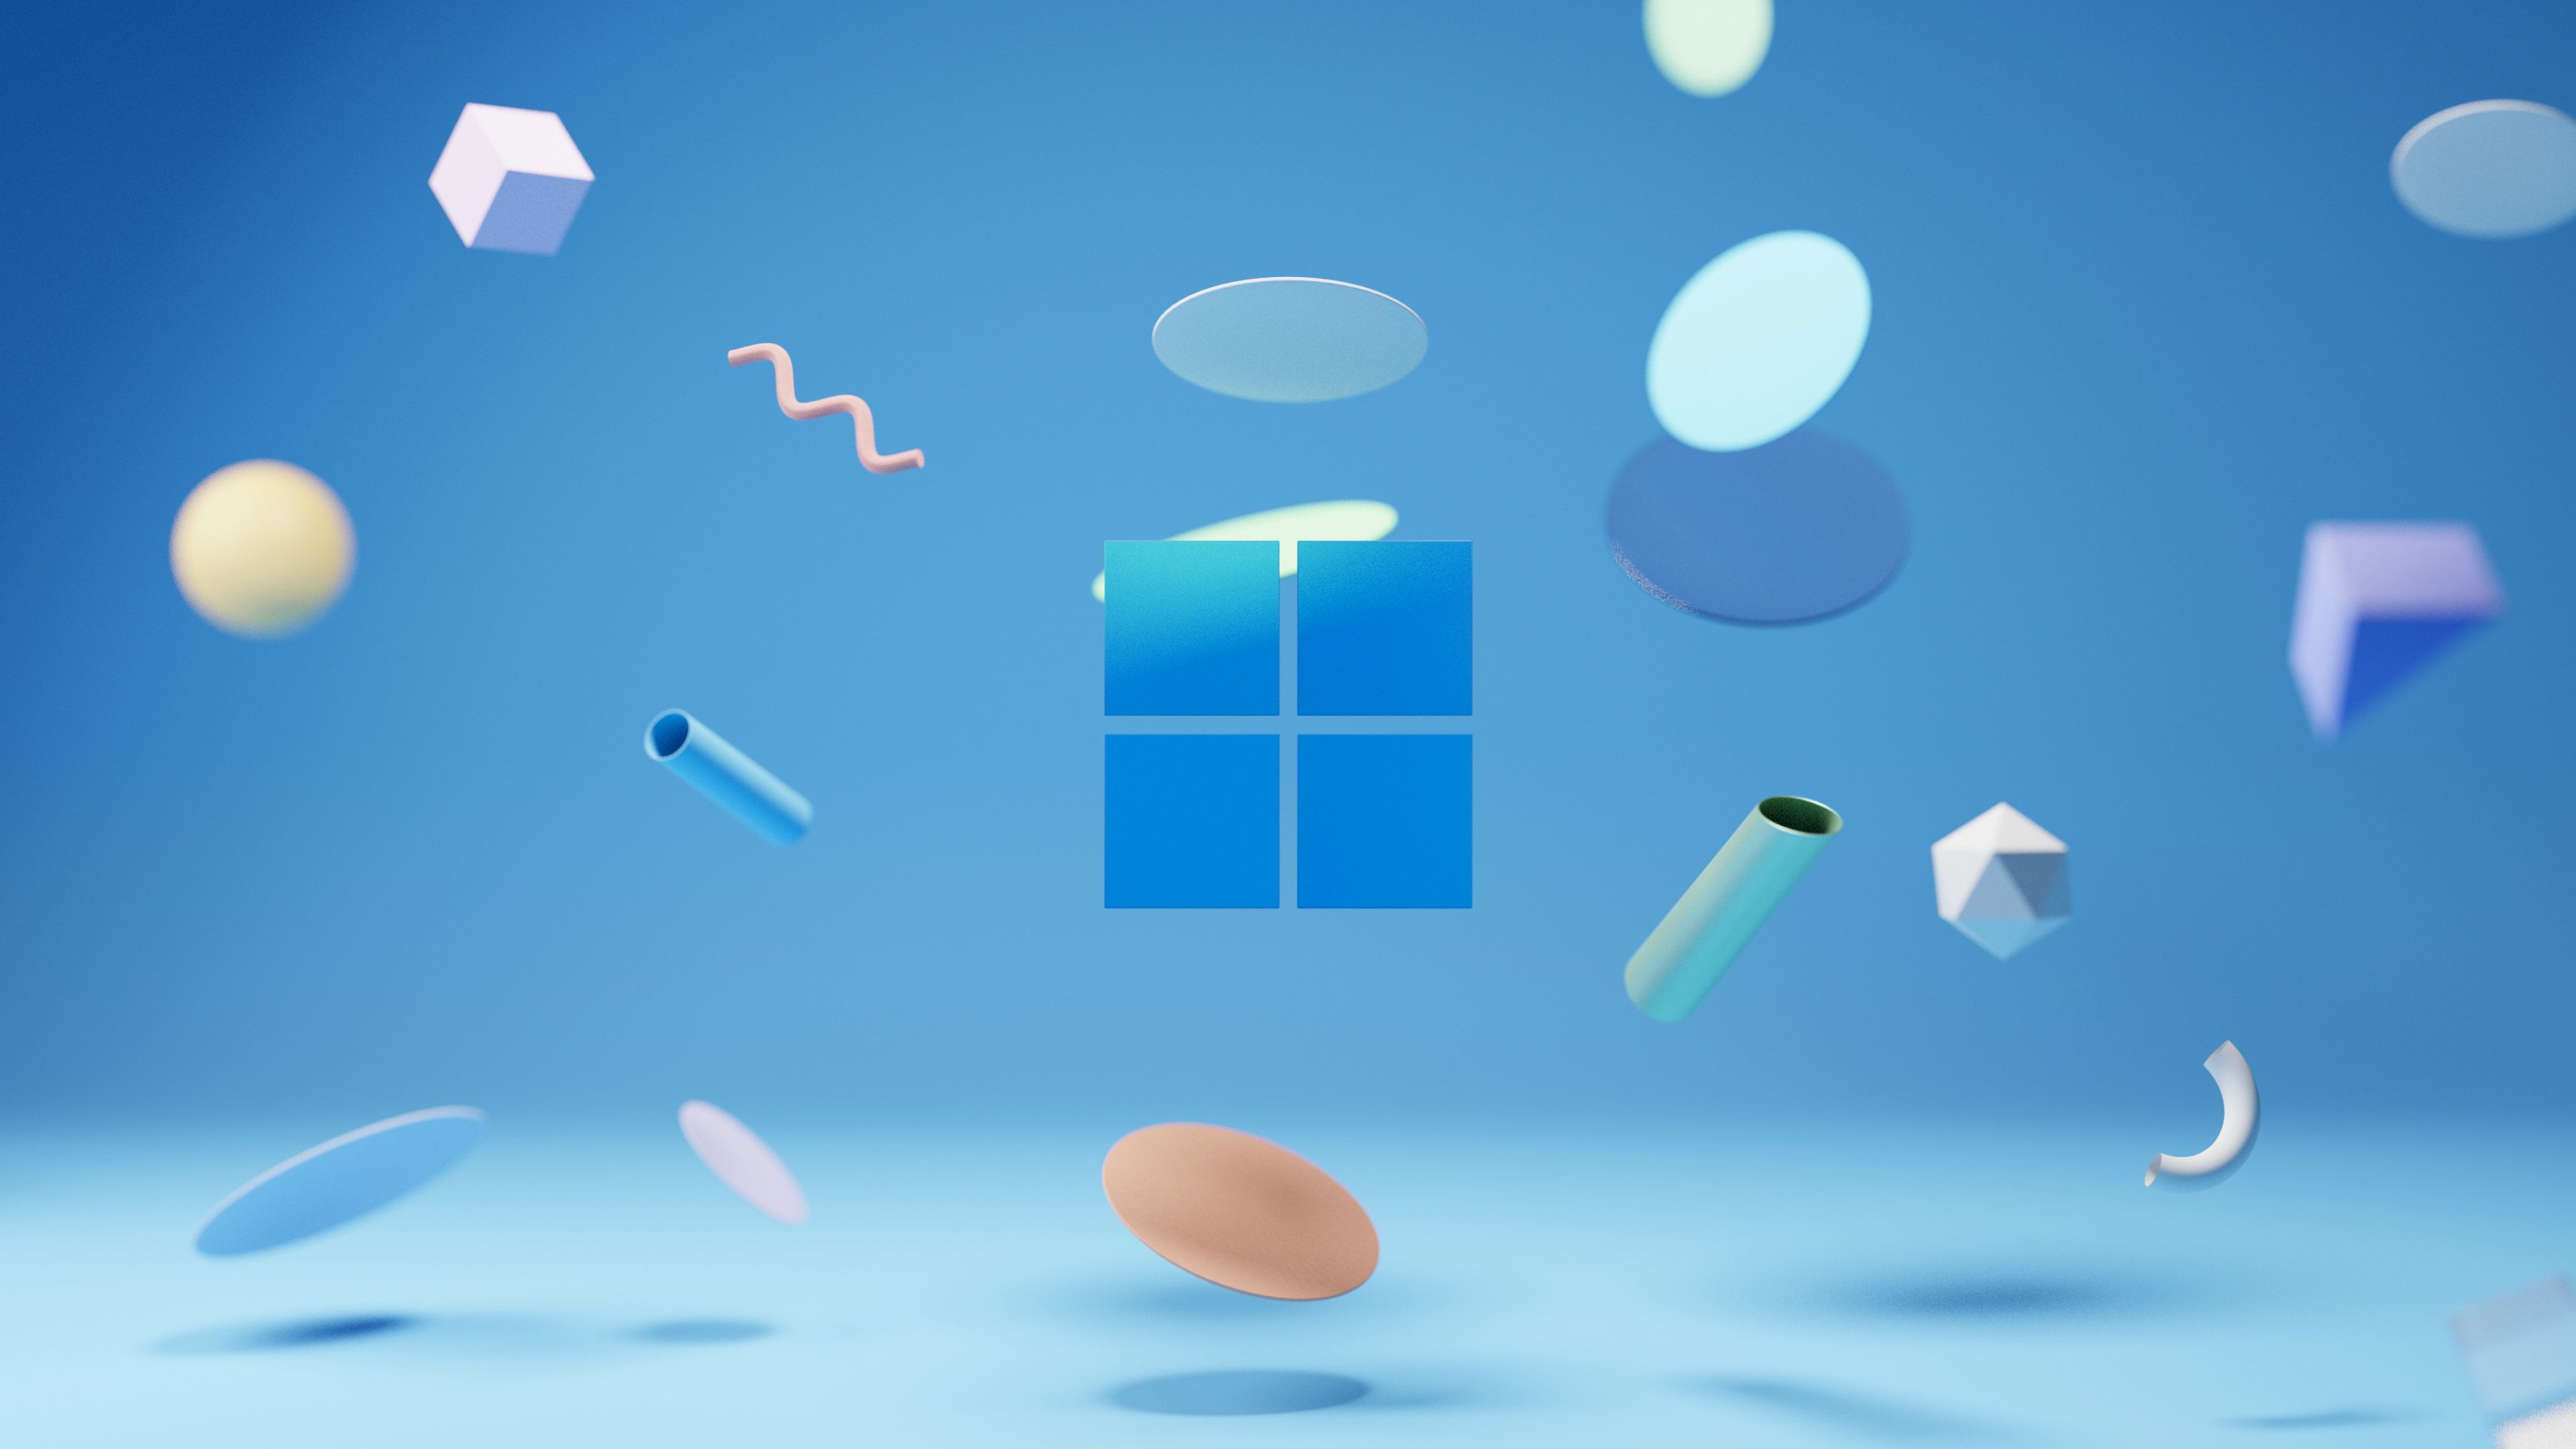 A Windows 11 wallpaper featuring a blue Windows logo surrounded by floating shapes - Windows 11